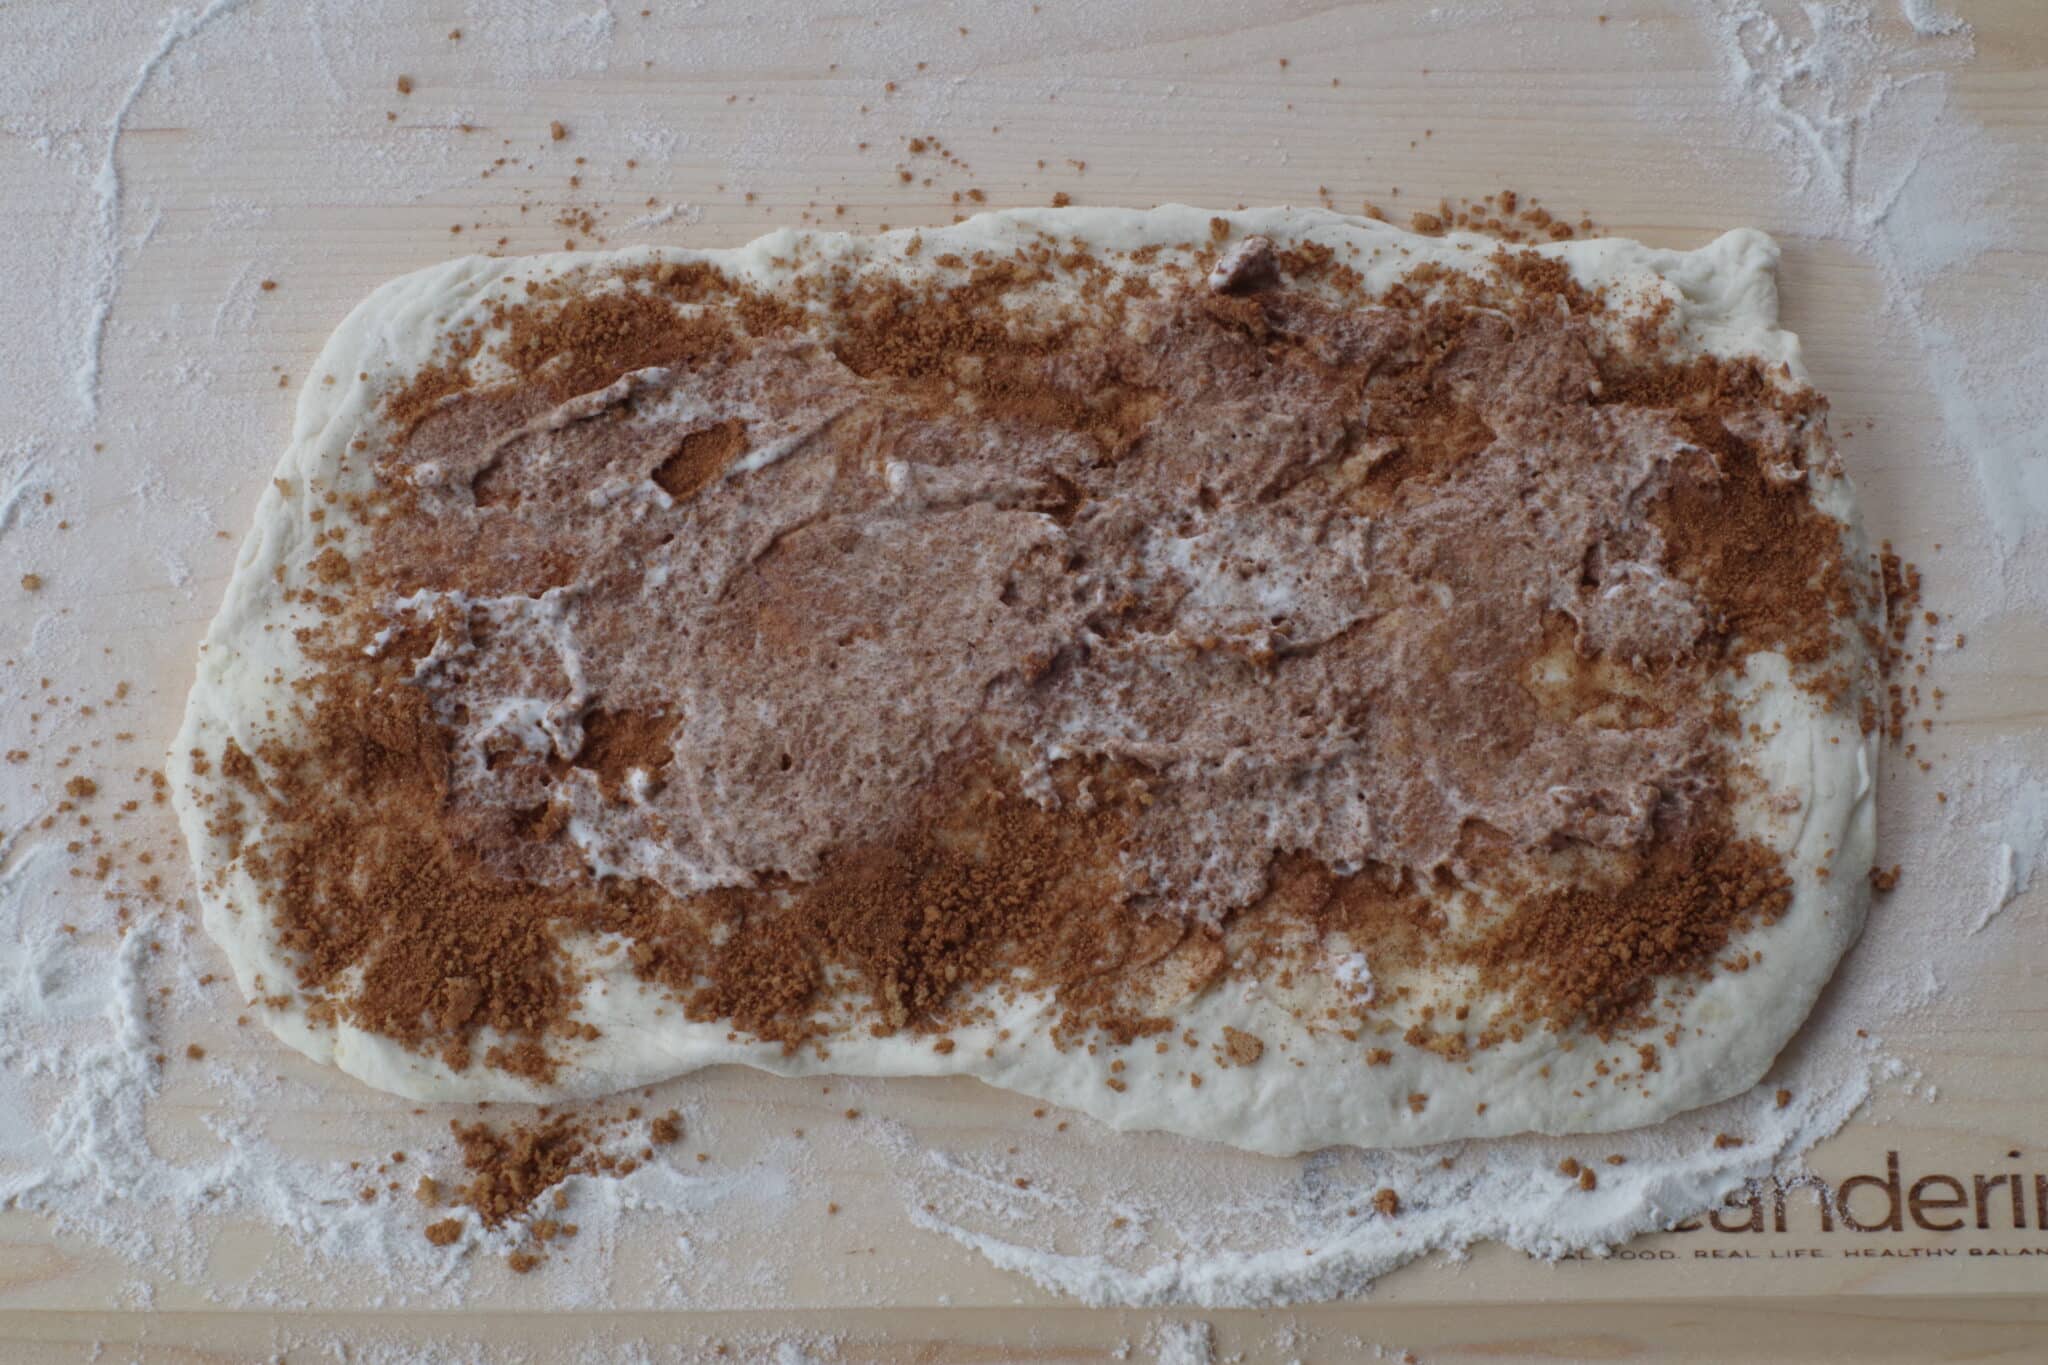 whipped cream spread on brown sugar cinnamon mixture on dough rectangle